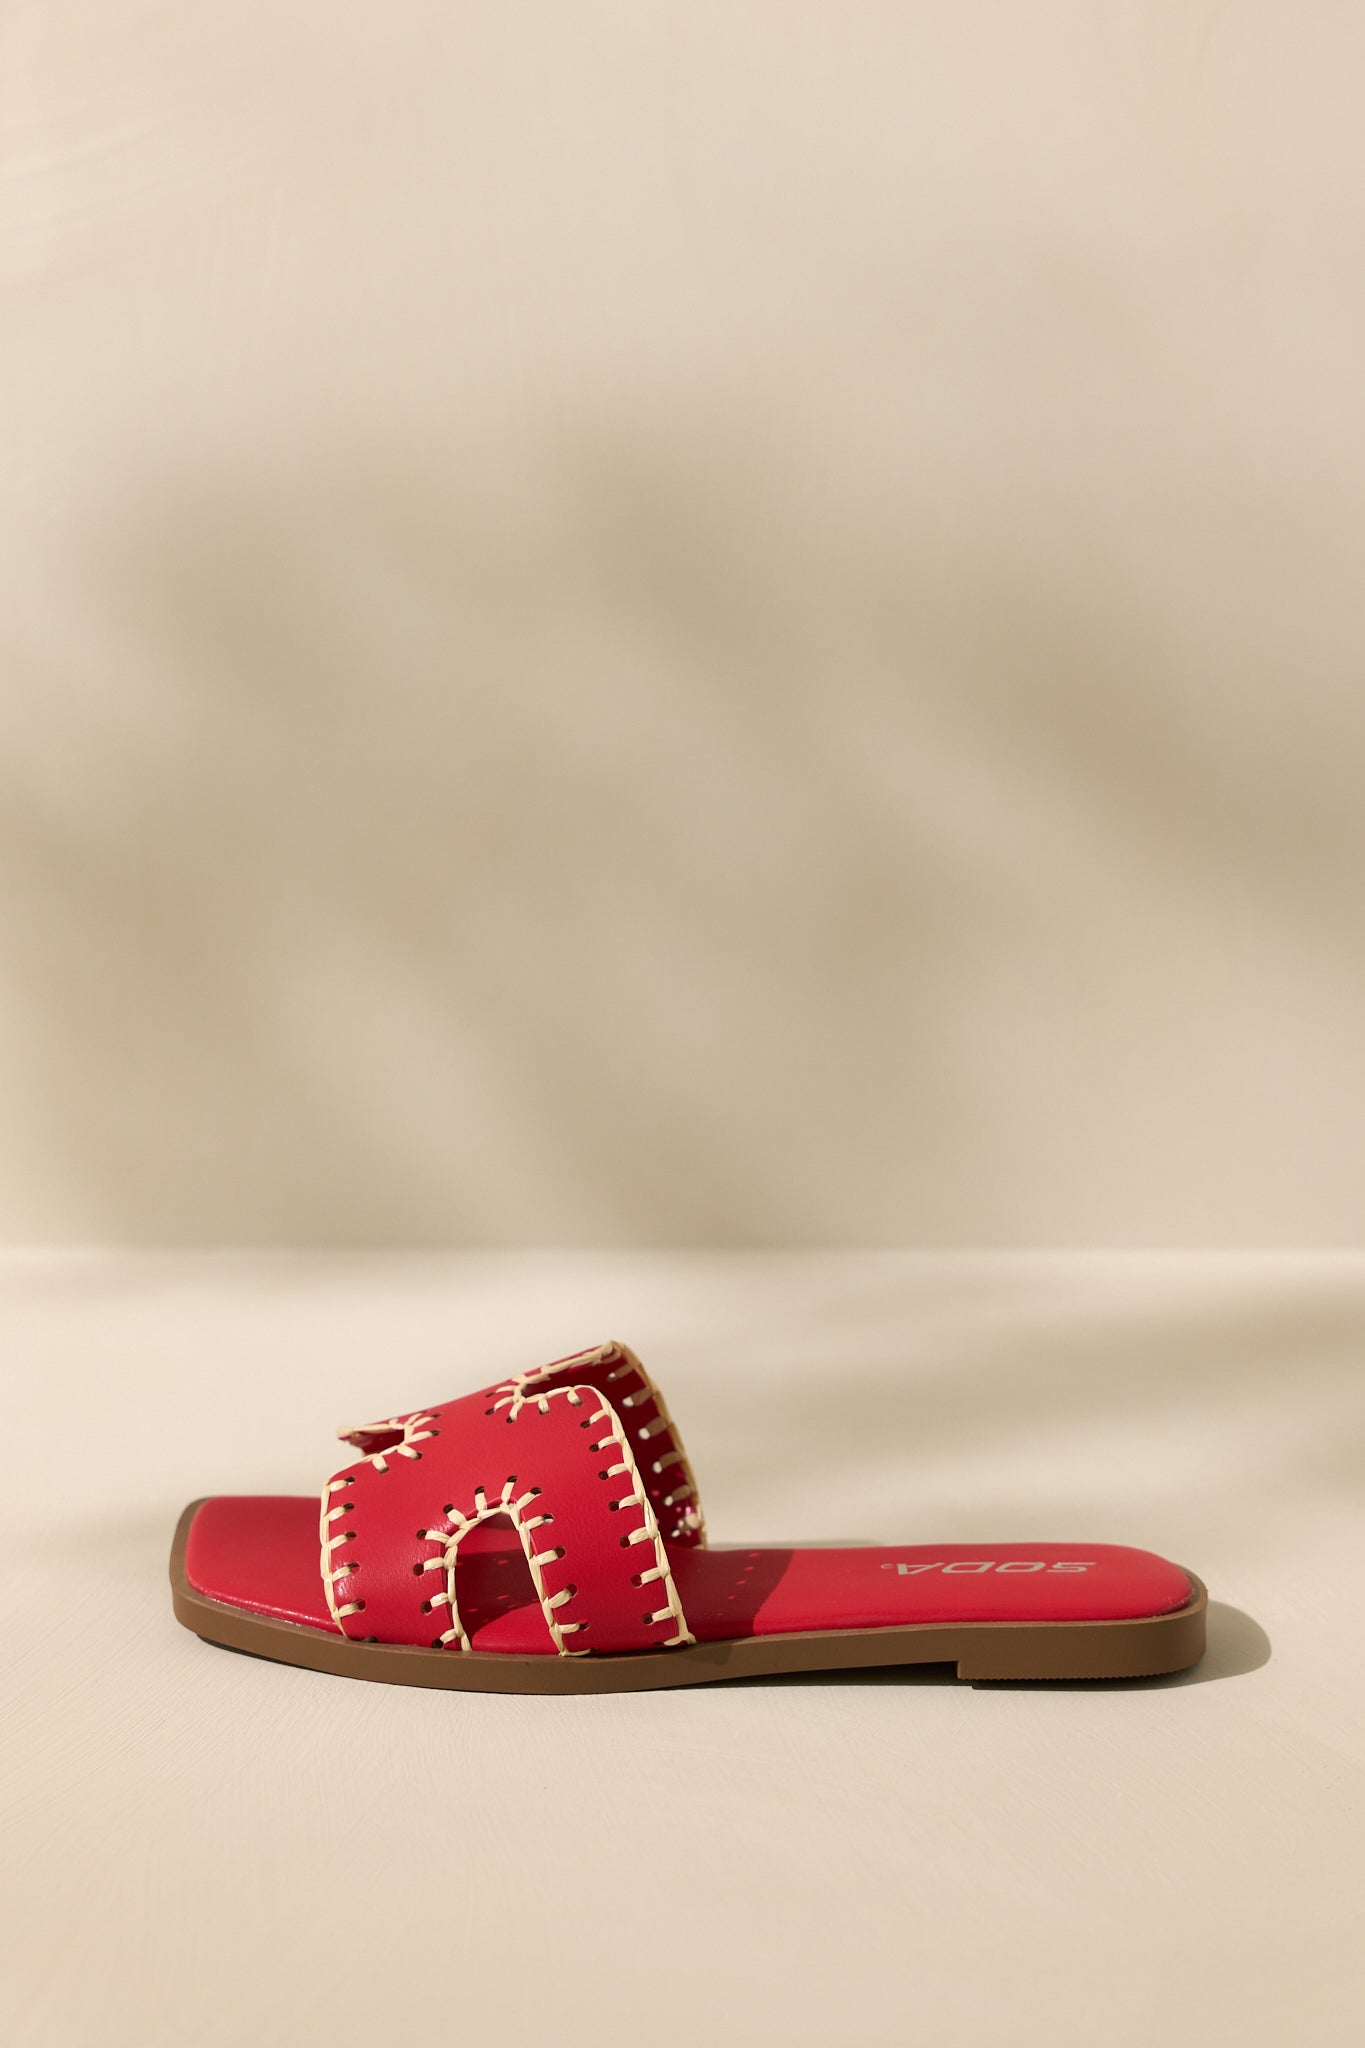 Side view of these red sandals that feature a square toe, a slip on design, a strap with cutouts over the top of the foot beige stitch detailing, and a high contrasting sole.